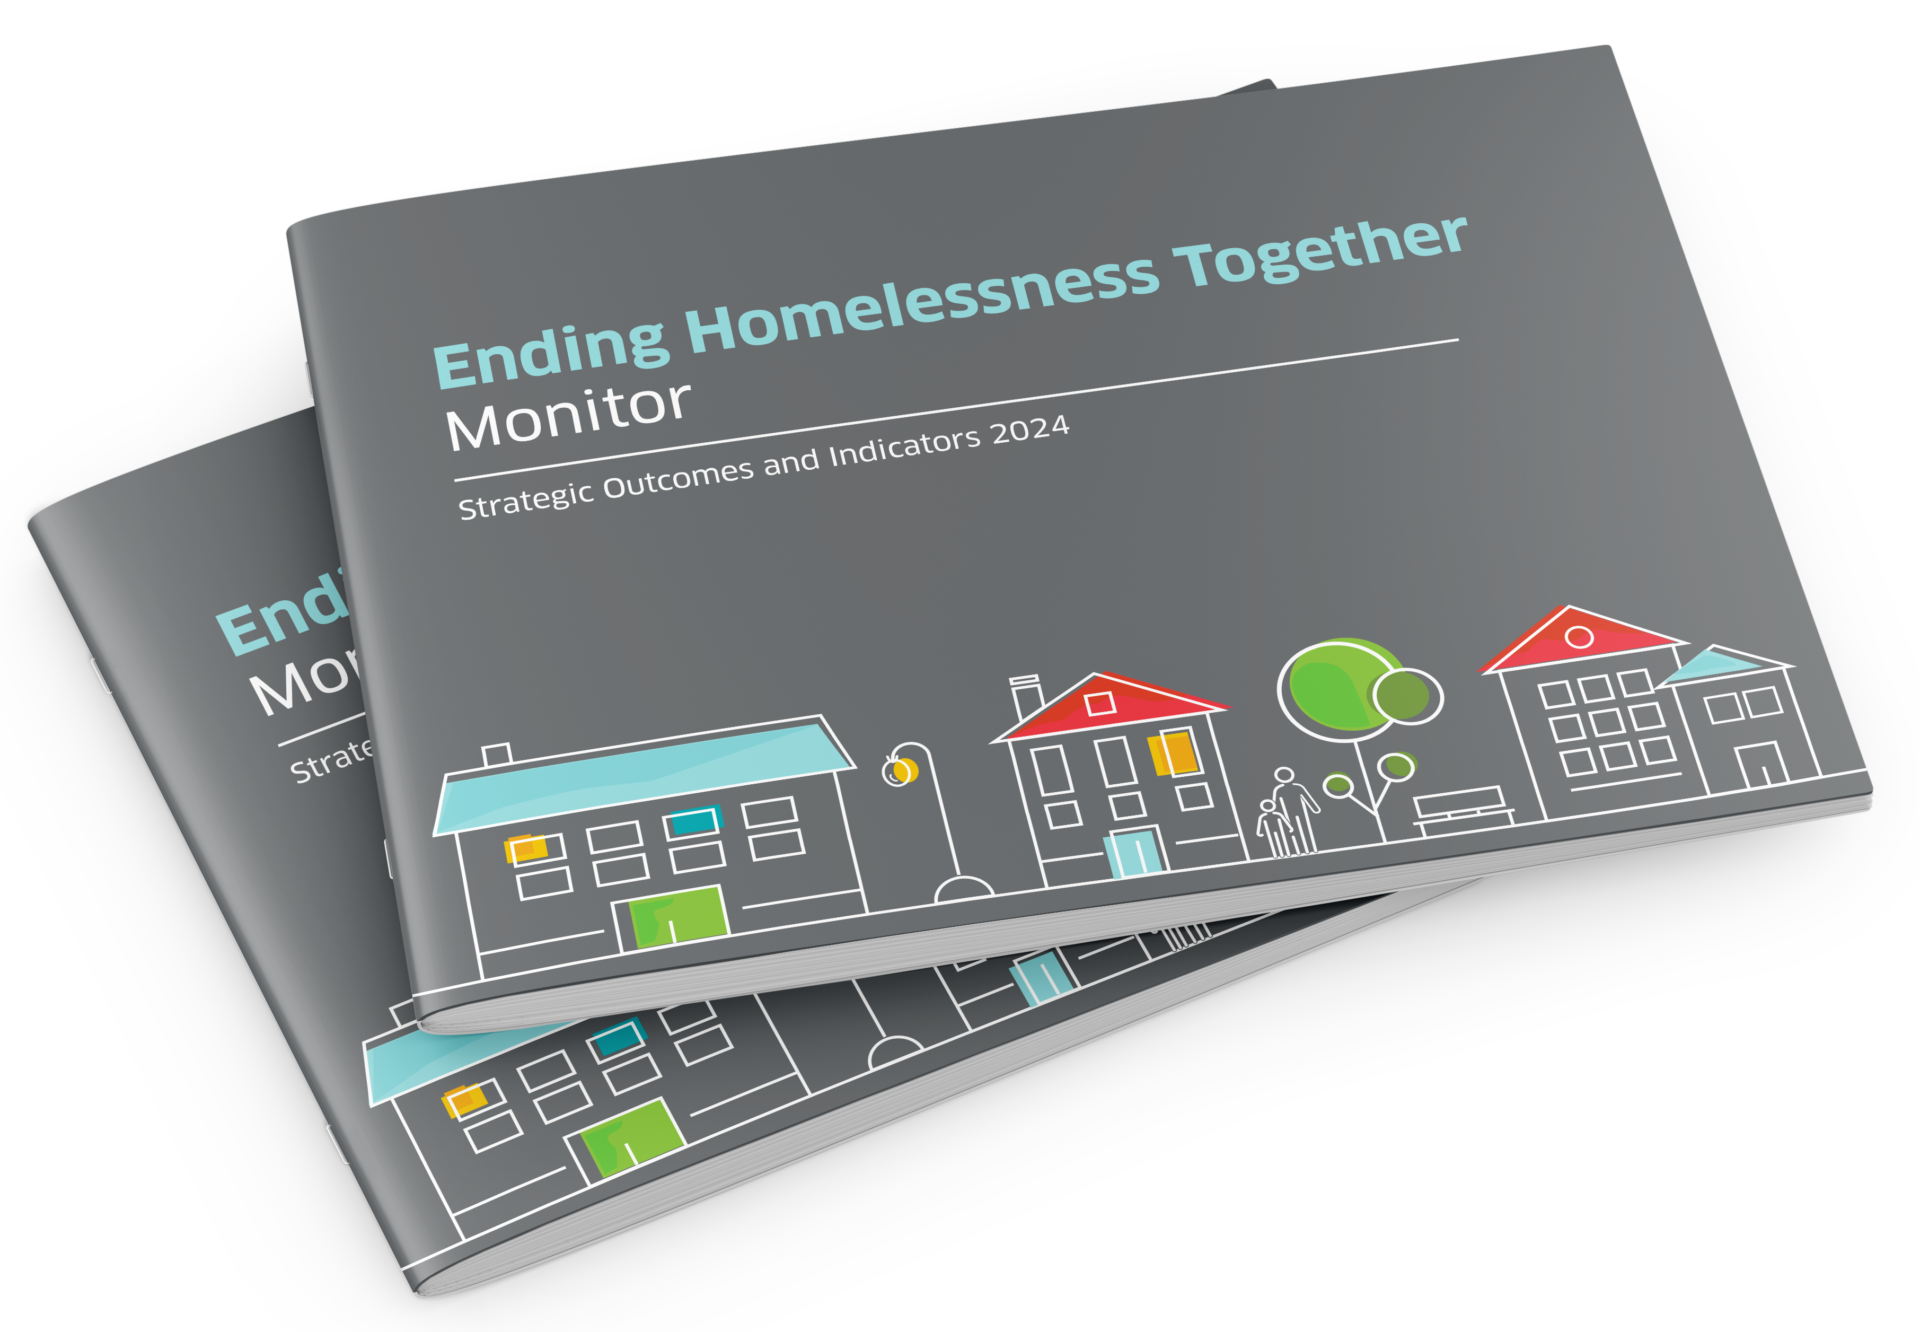 Scottish Government commissions monitor on homelessness